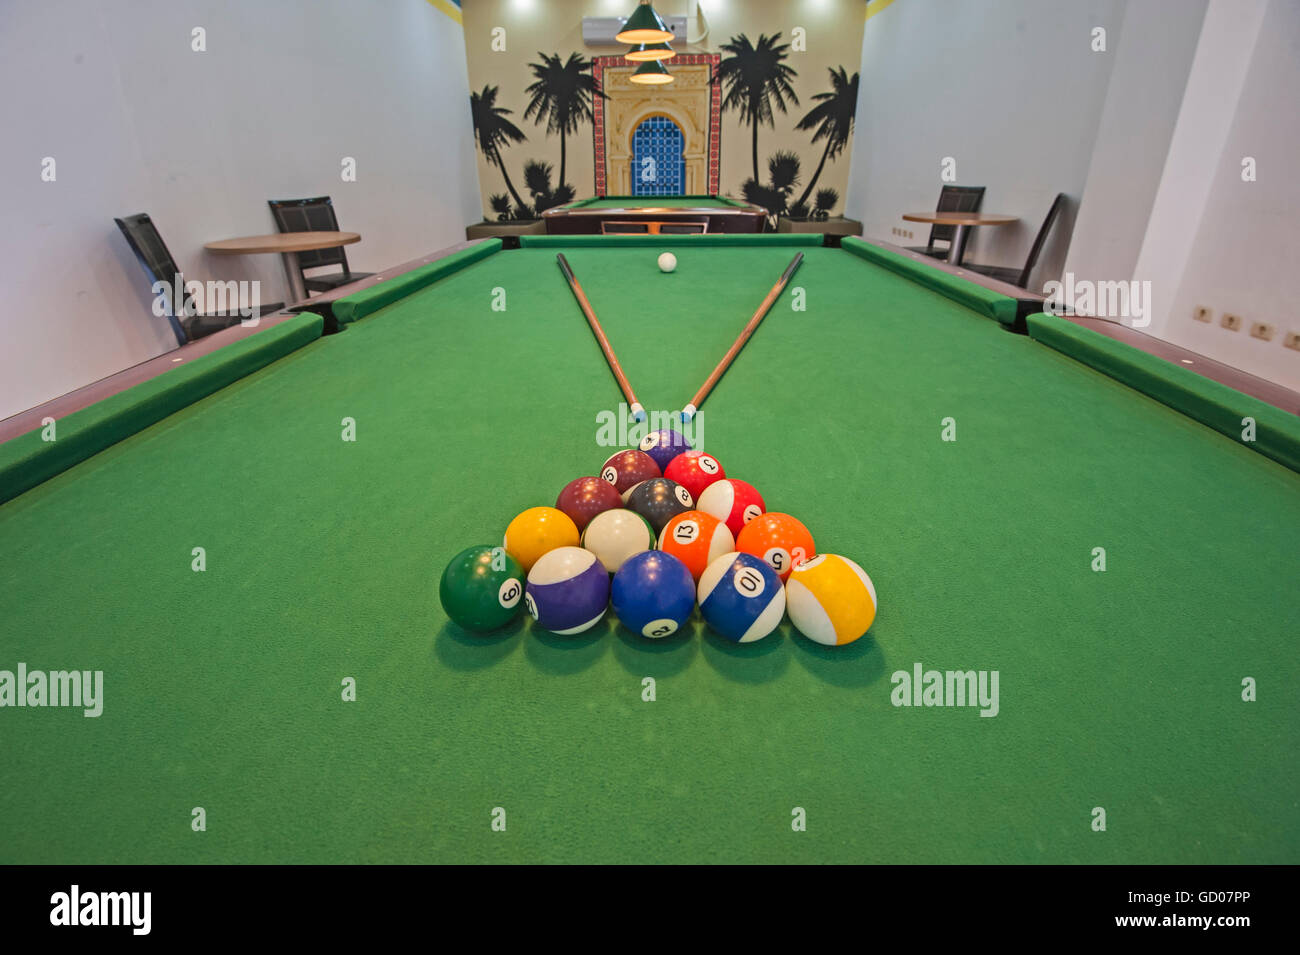 Closeup of billiard balls on green felt table with pool cues in games room Stock Photo